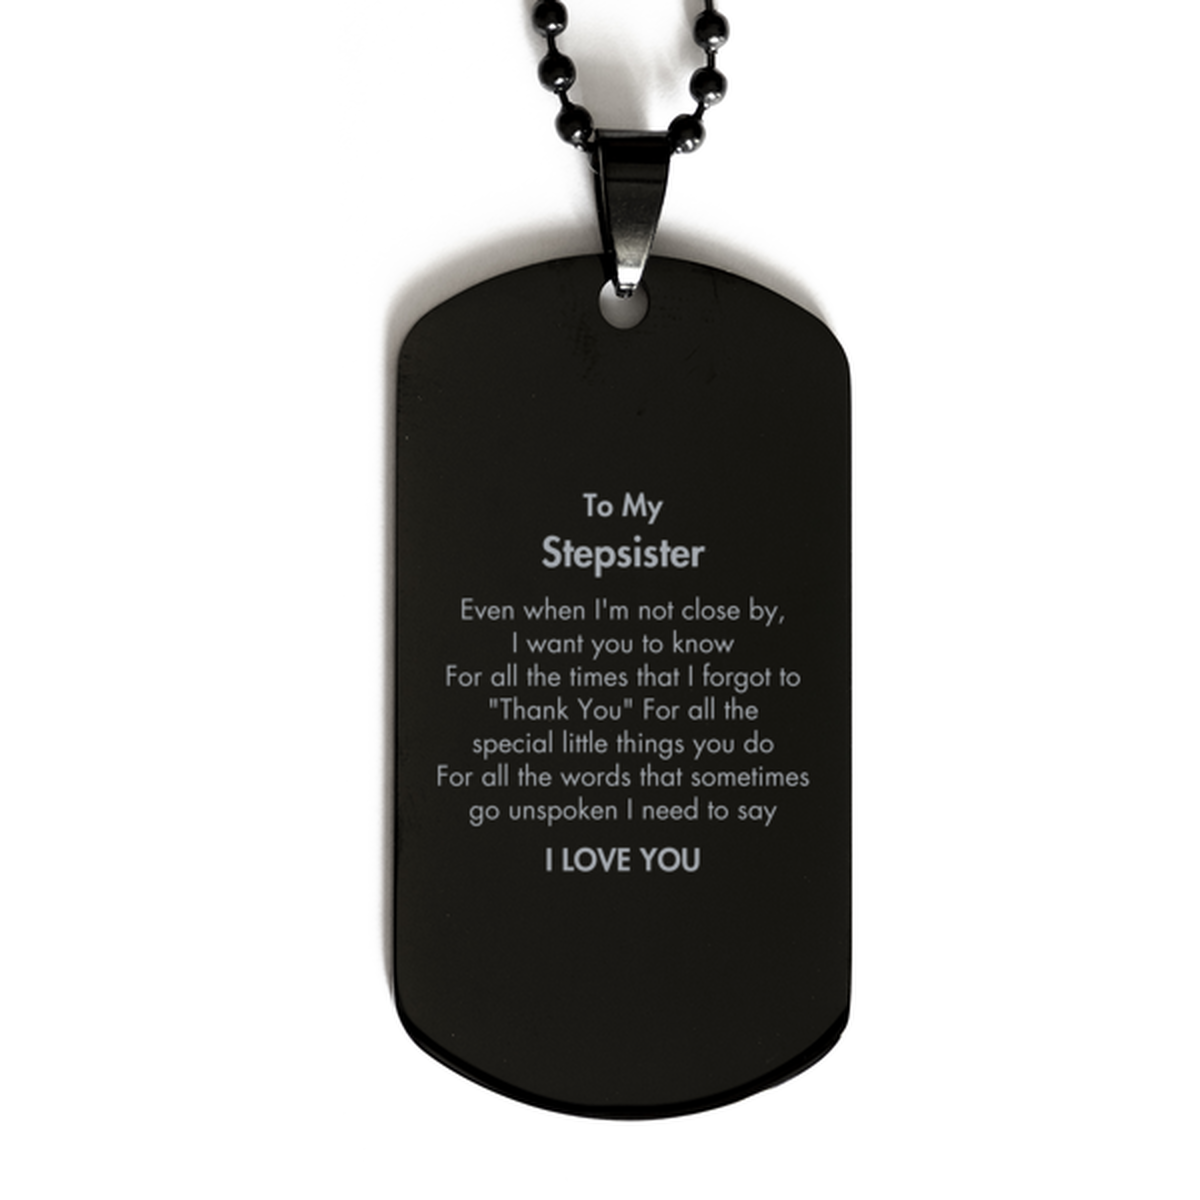 Thank You Gifts for Stepsister, Keepsake Black Dog Tag Gifts for Stepsister Birthday Mother's day Father's Day Stepsister For all the words That sometimes go unspoken I need to say I LOVE YOU